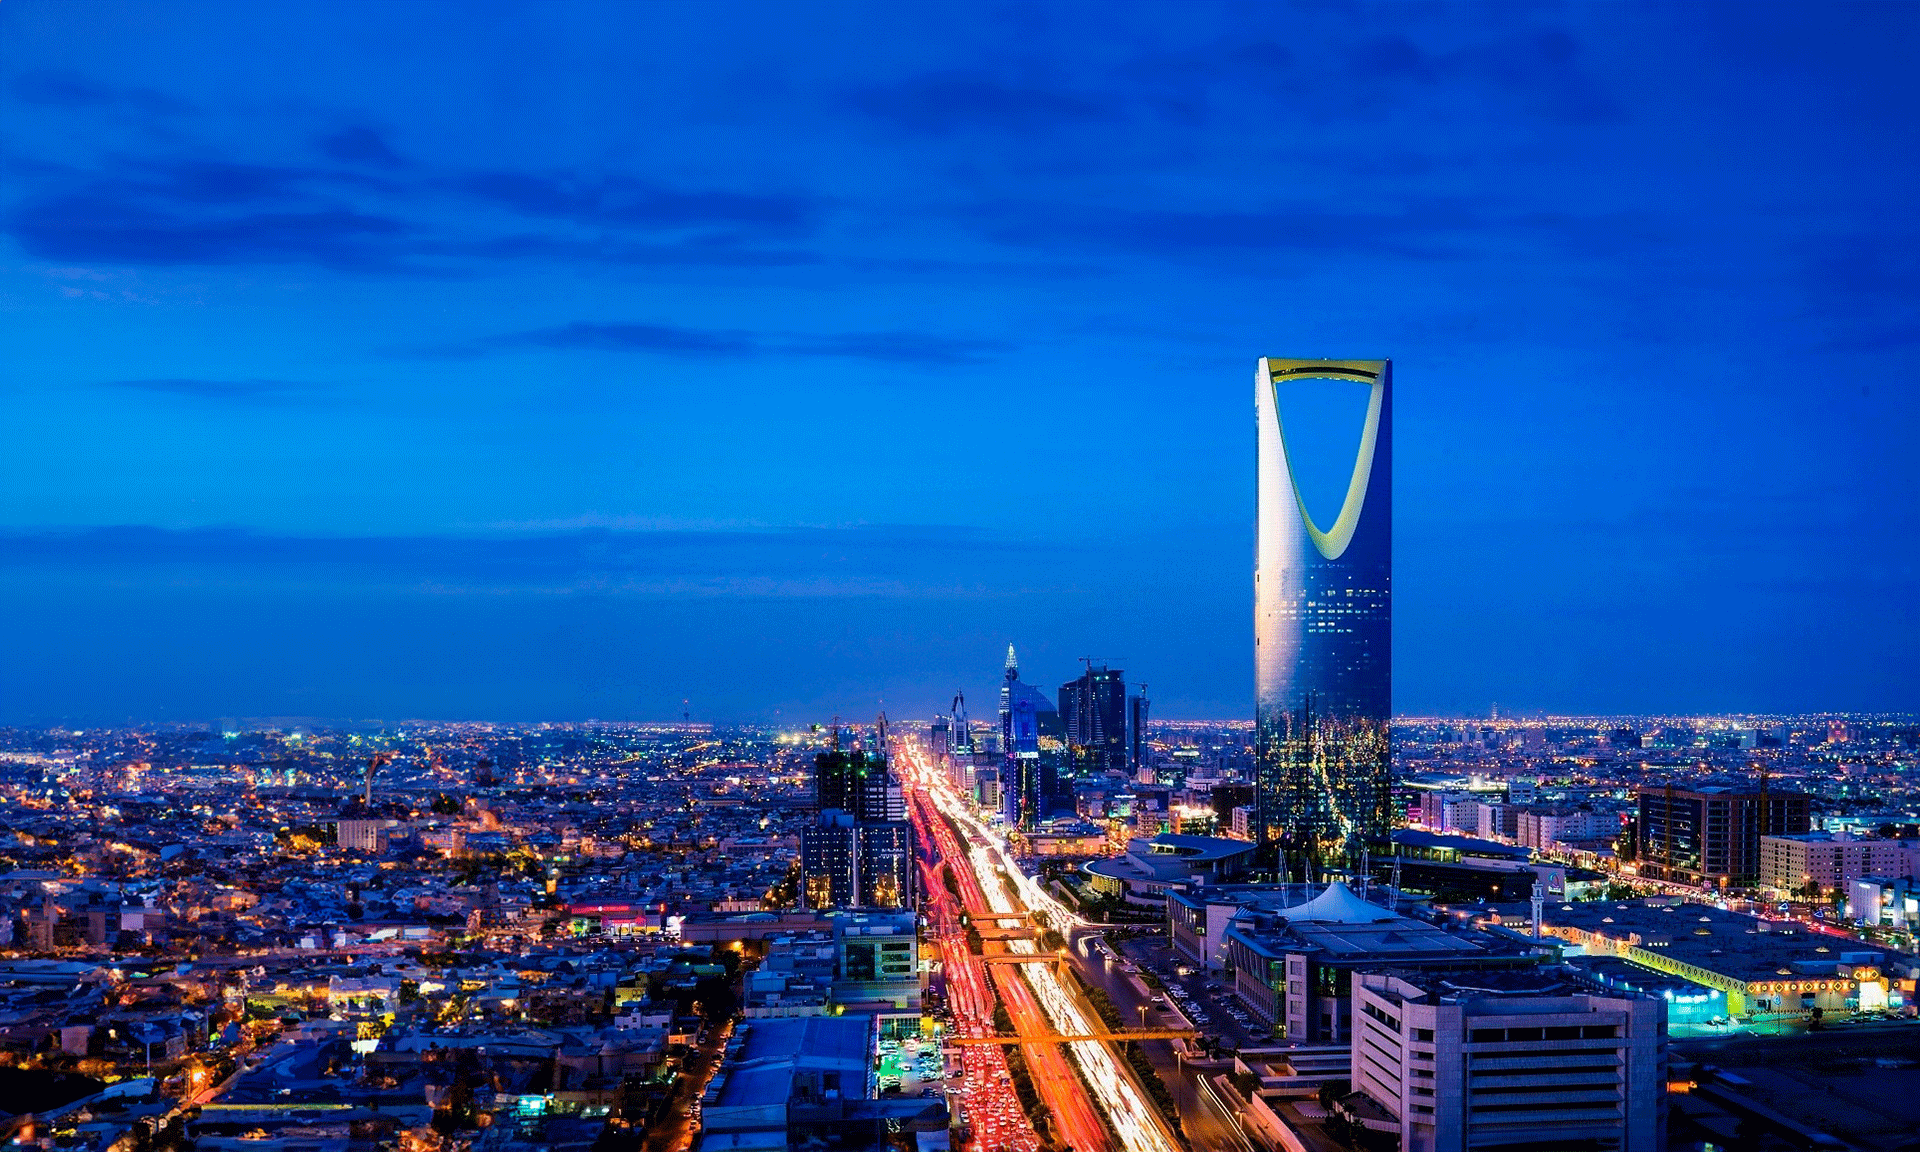 Why should you invest in Saudi Arabia